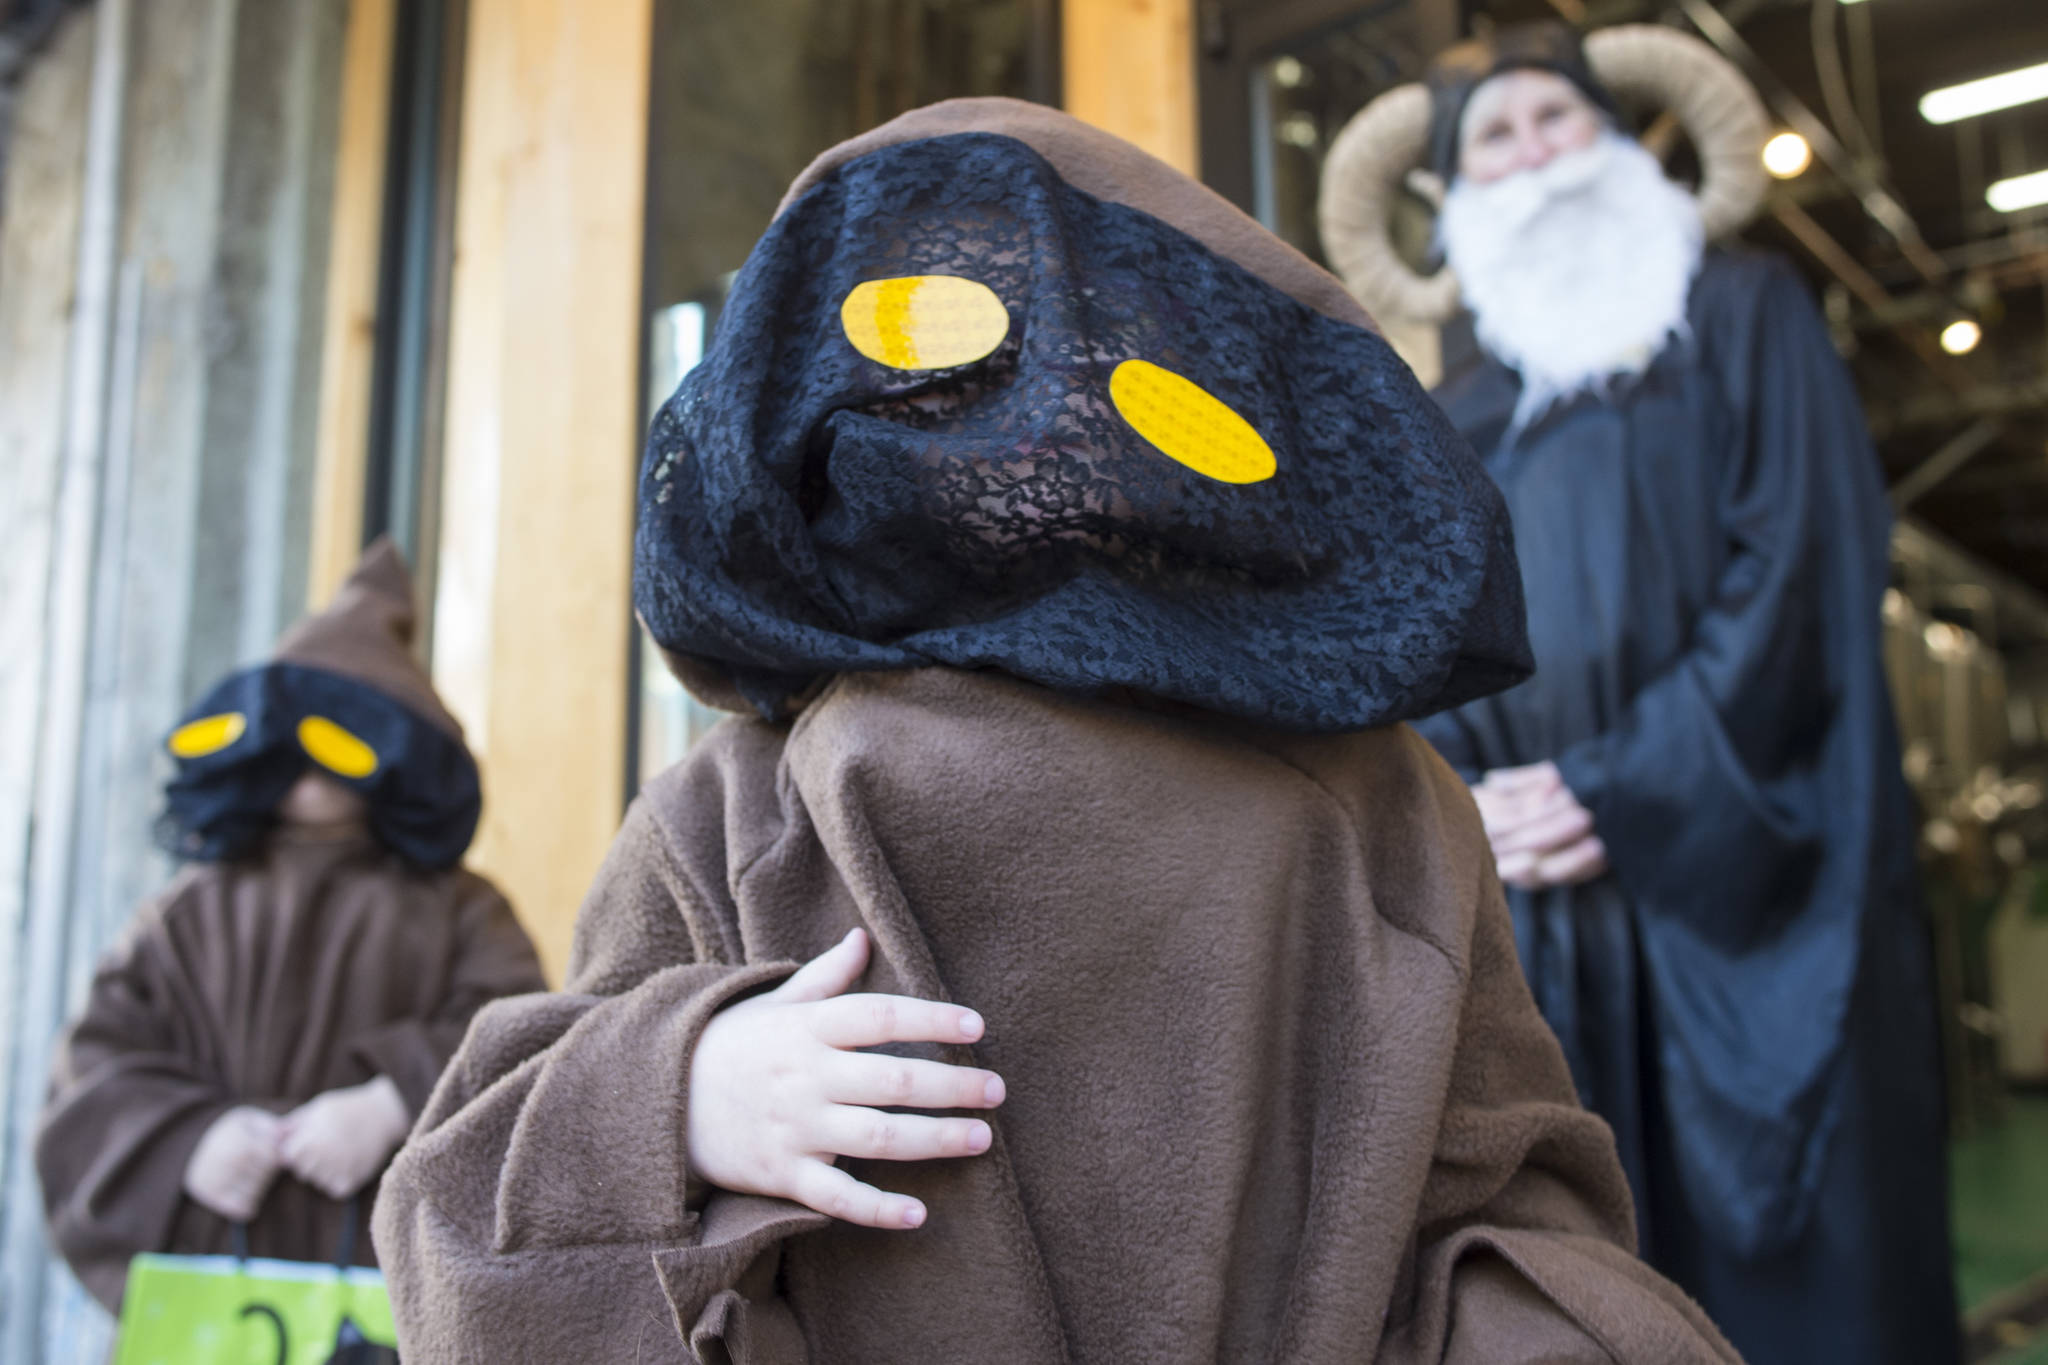 Aurelia Peoples, 4, center, and Mia Belvins, 3, are costumed as Jawas as they visit DJ Thomson at Devil’s Club Brewery on Wednesday, Oct. 31, 2018. For the fourth year Kindred Post has organized the Halloween celebration for trick-or-treaters. (Michael Penn | Juneau Empire)